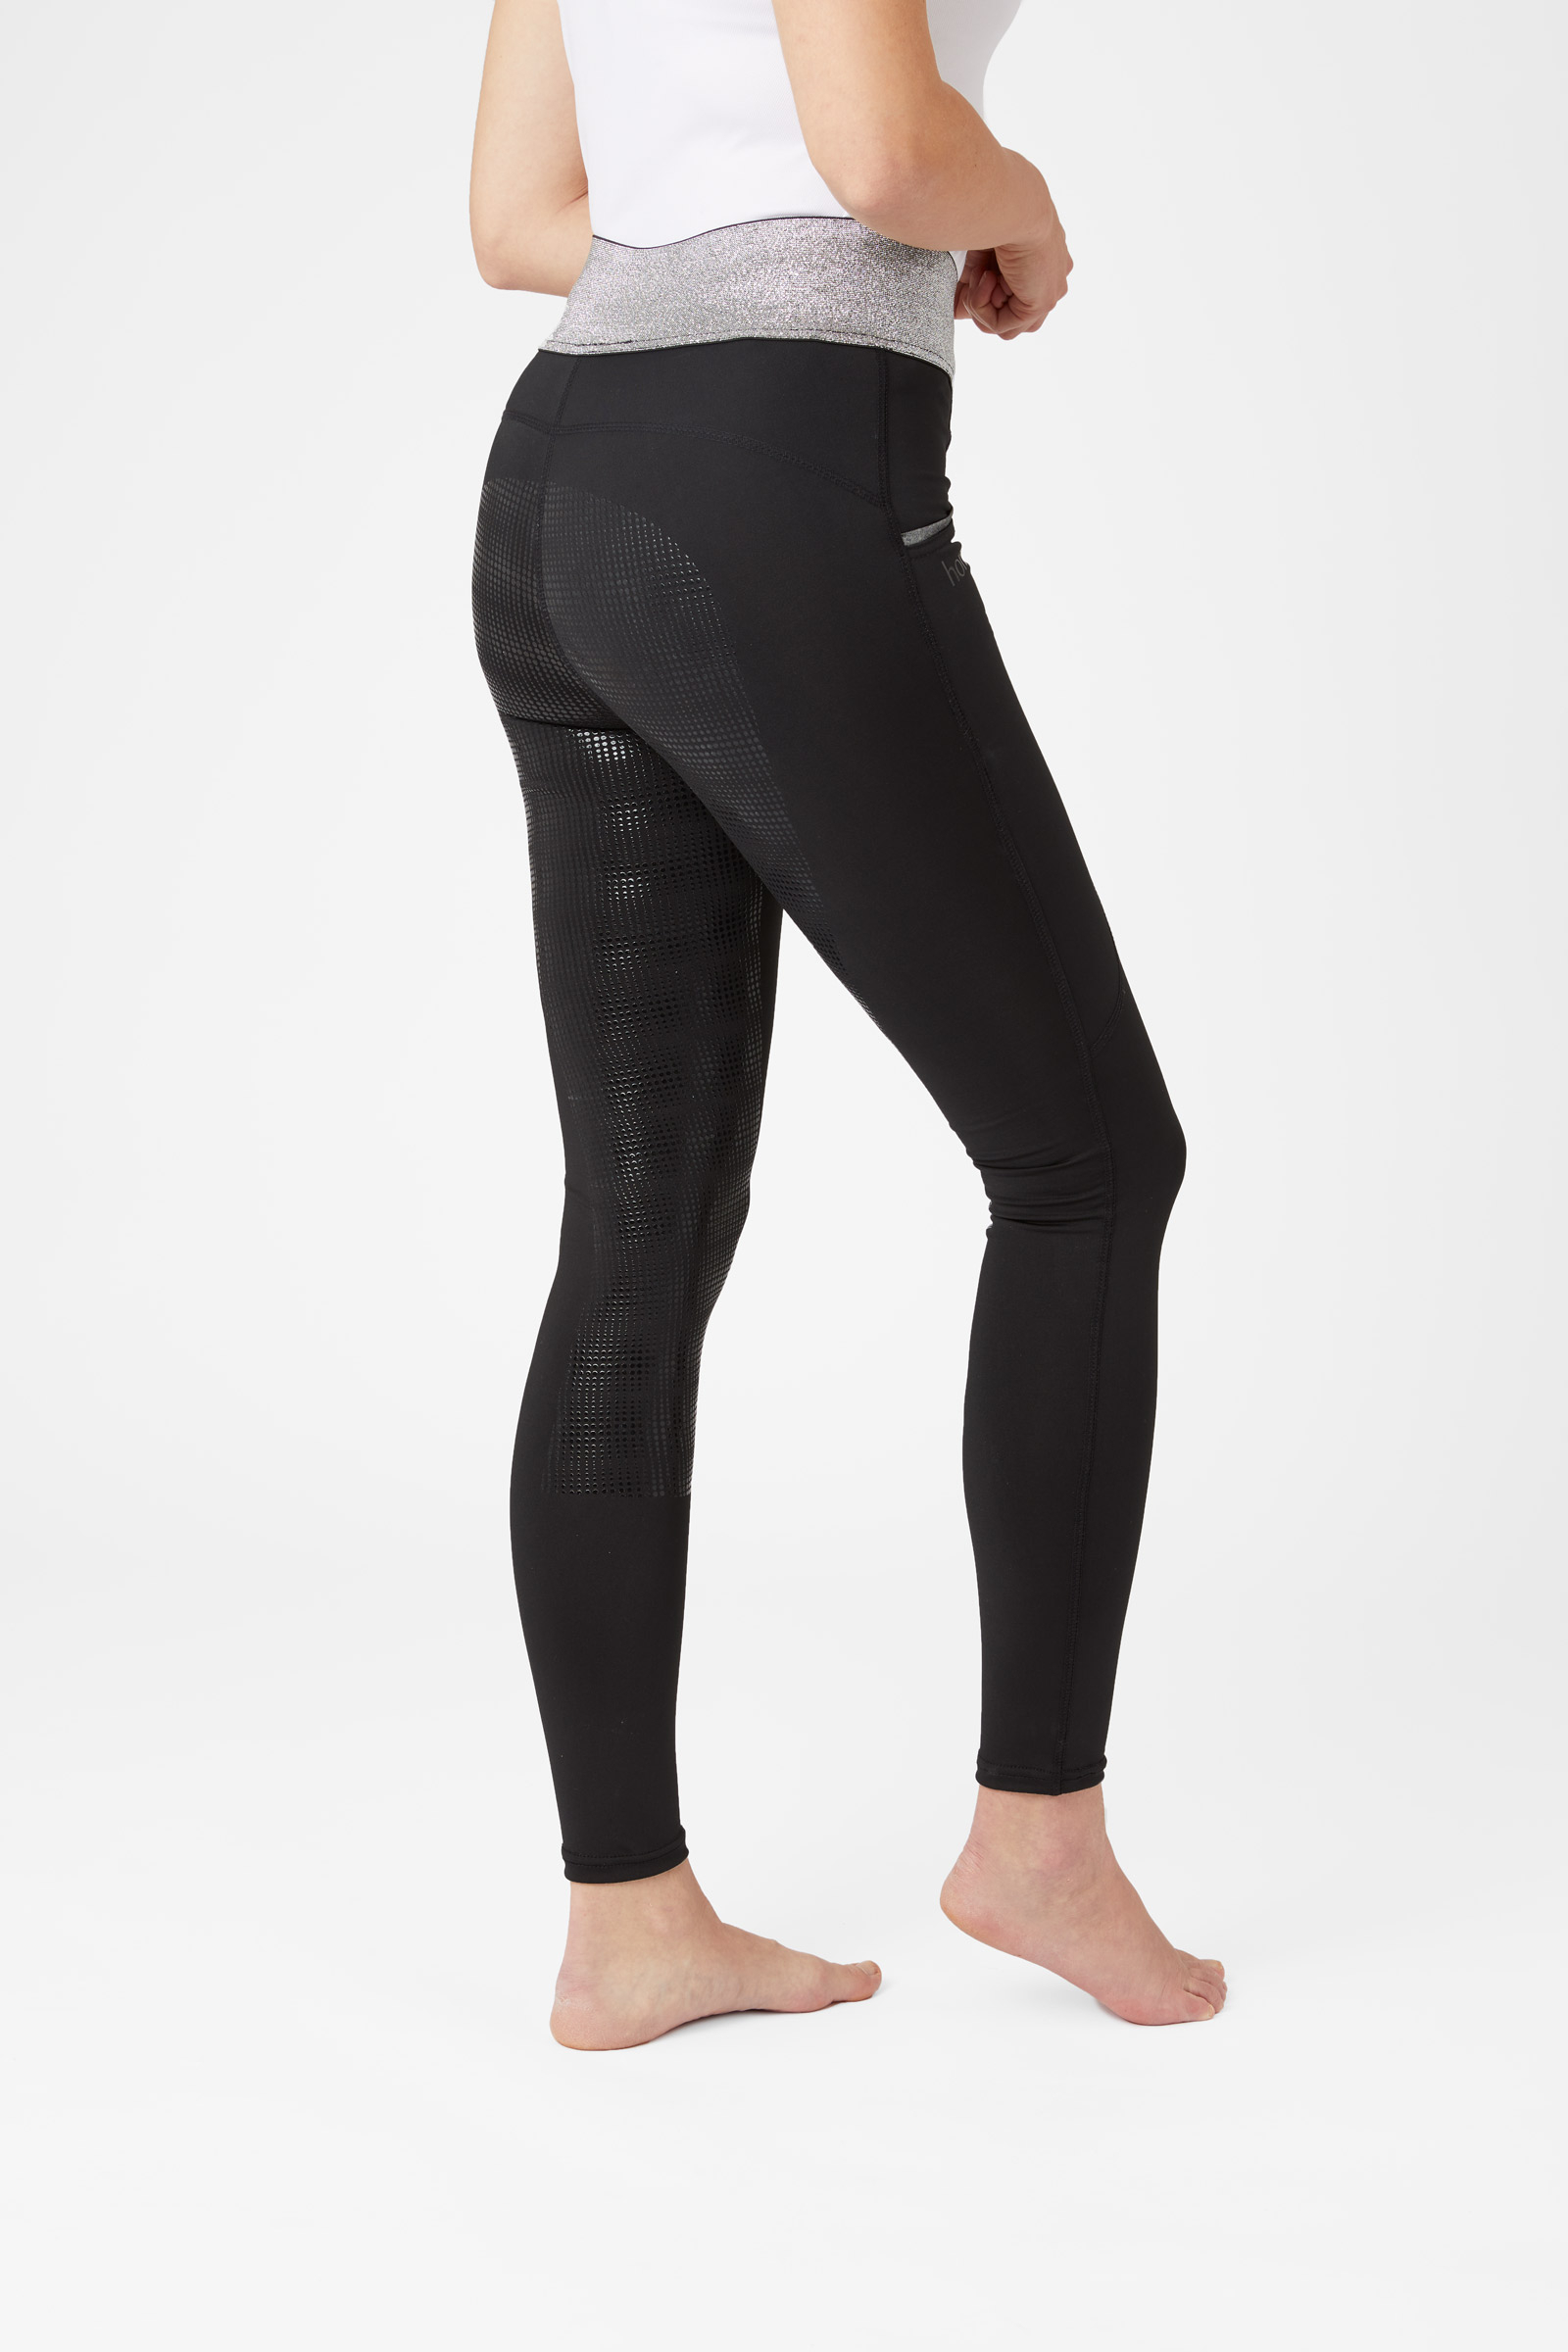 Horze Melissa Women's Seamless Thermo Riding Tights